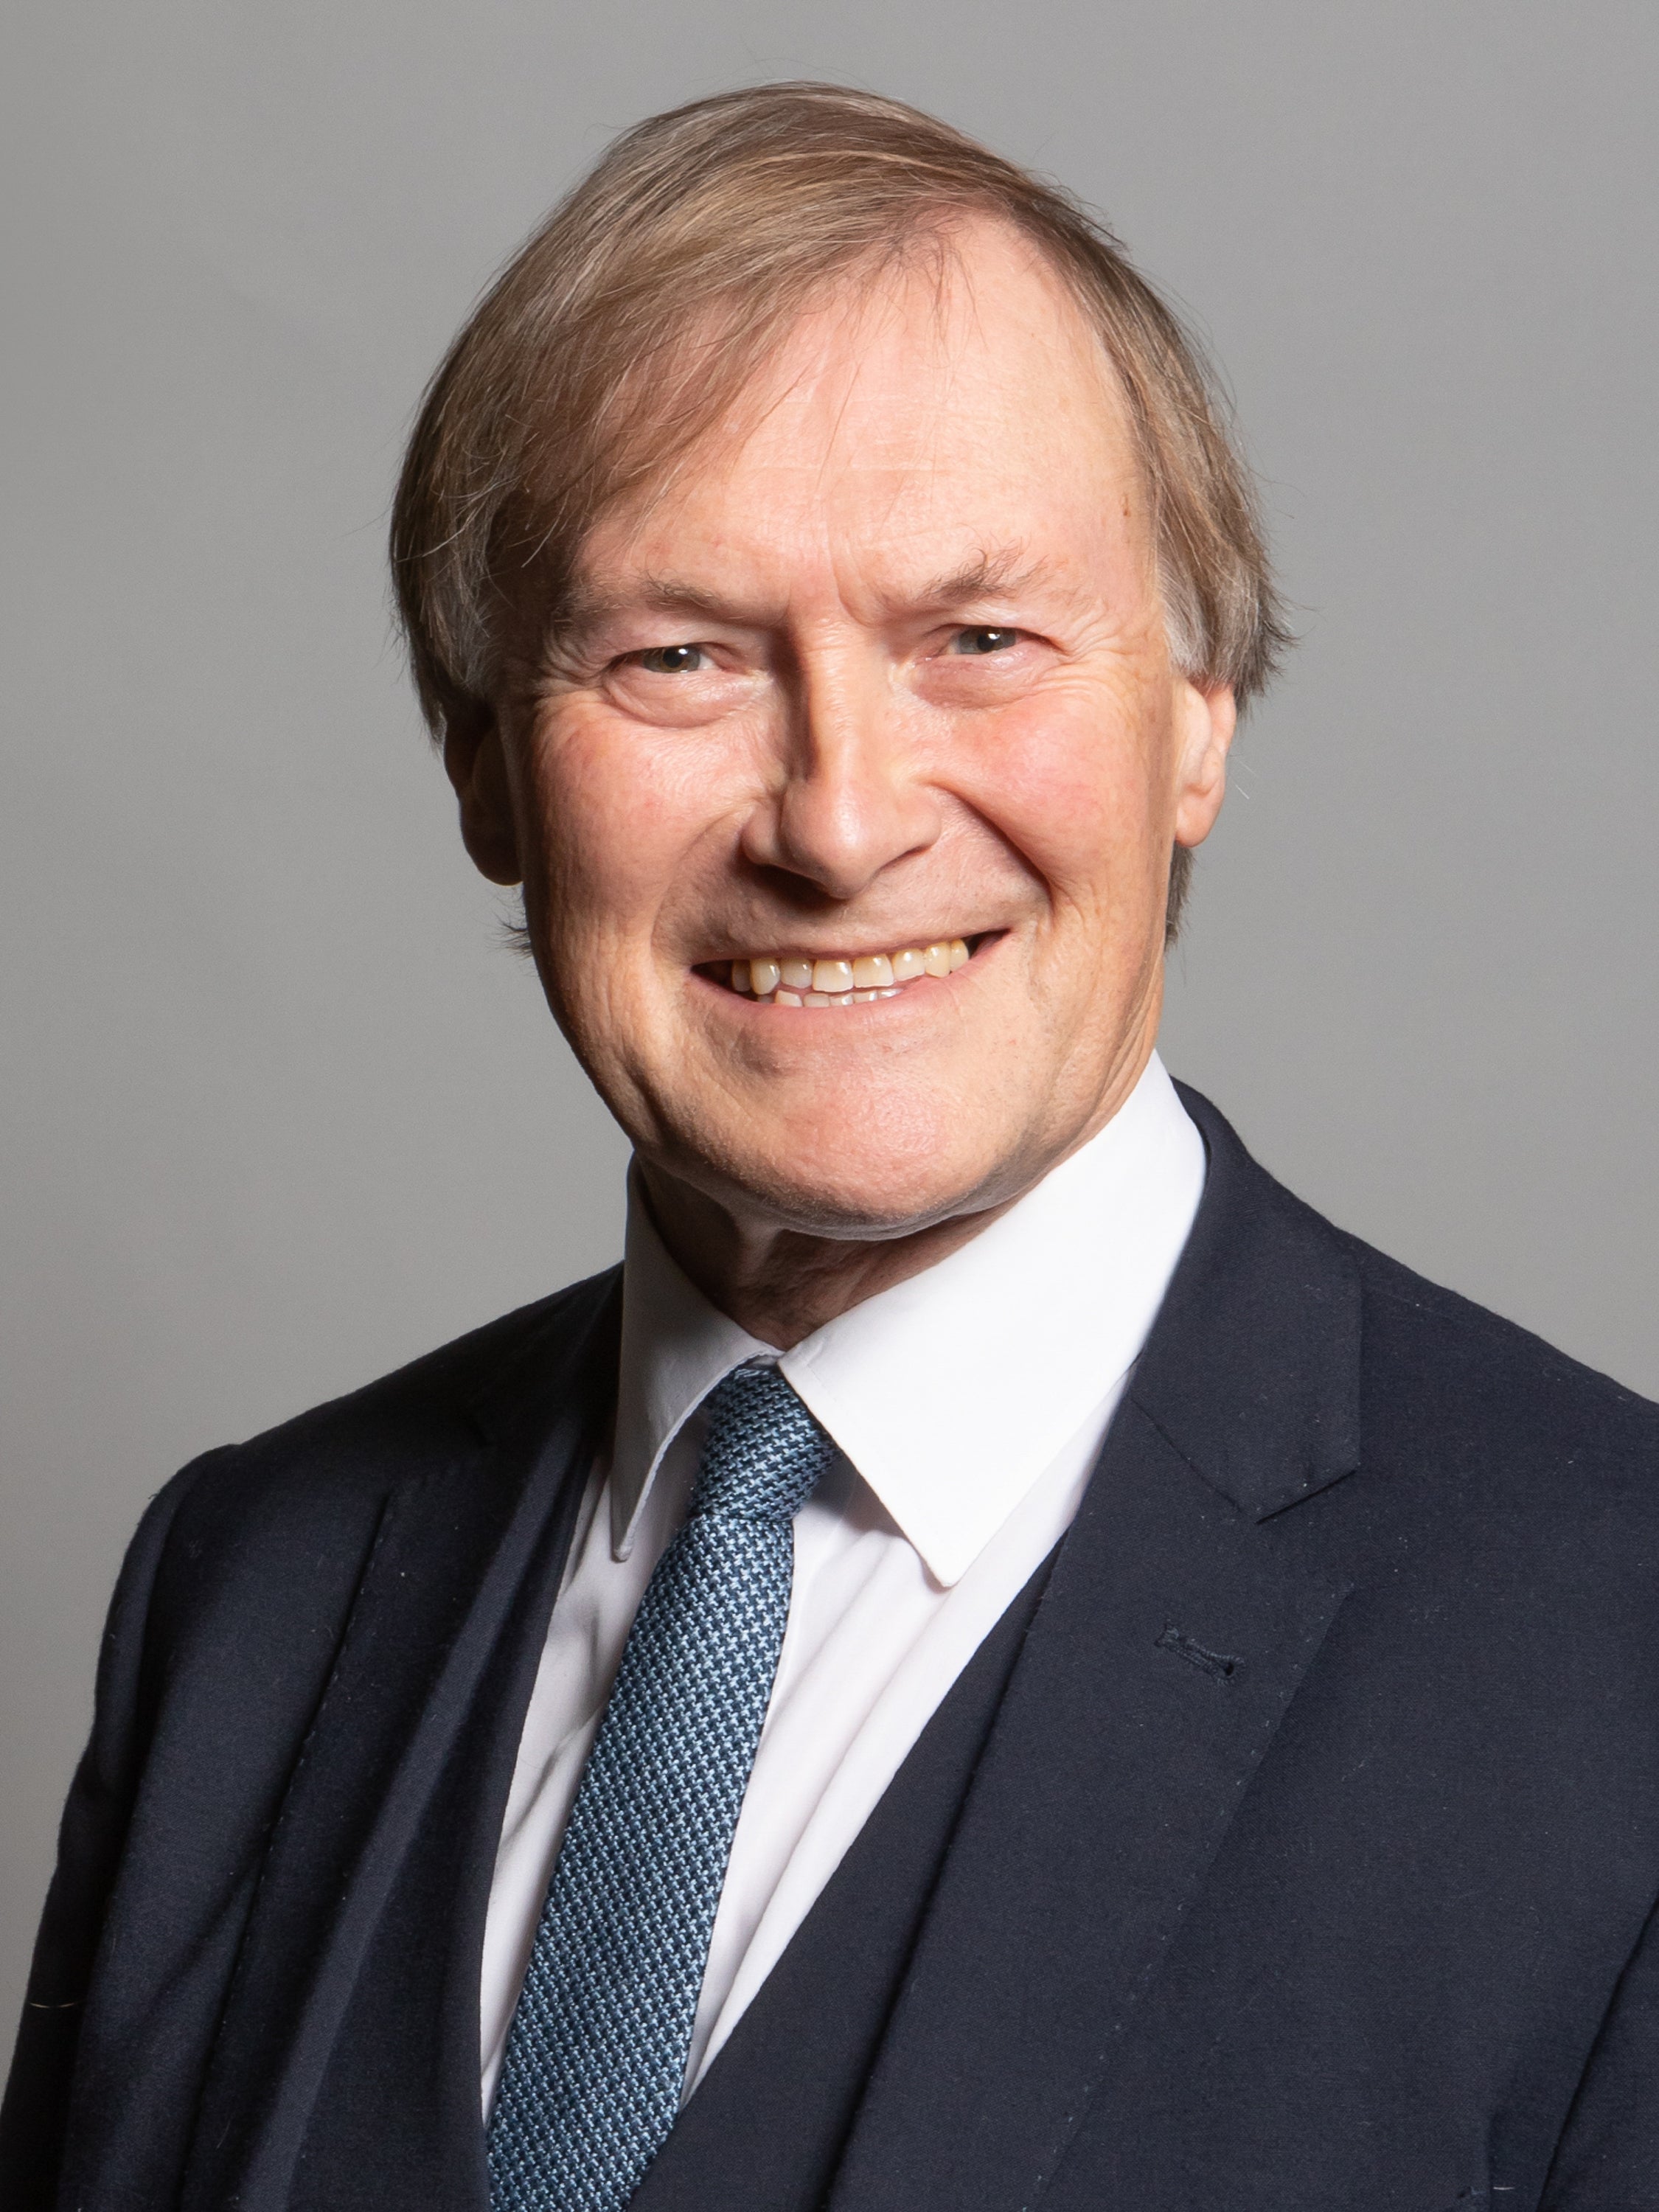 Sir David Amess was stabbed more than 20 times by Ali